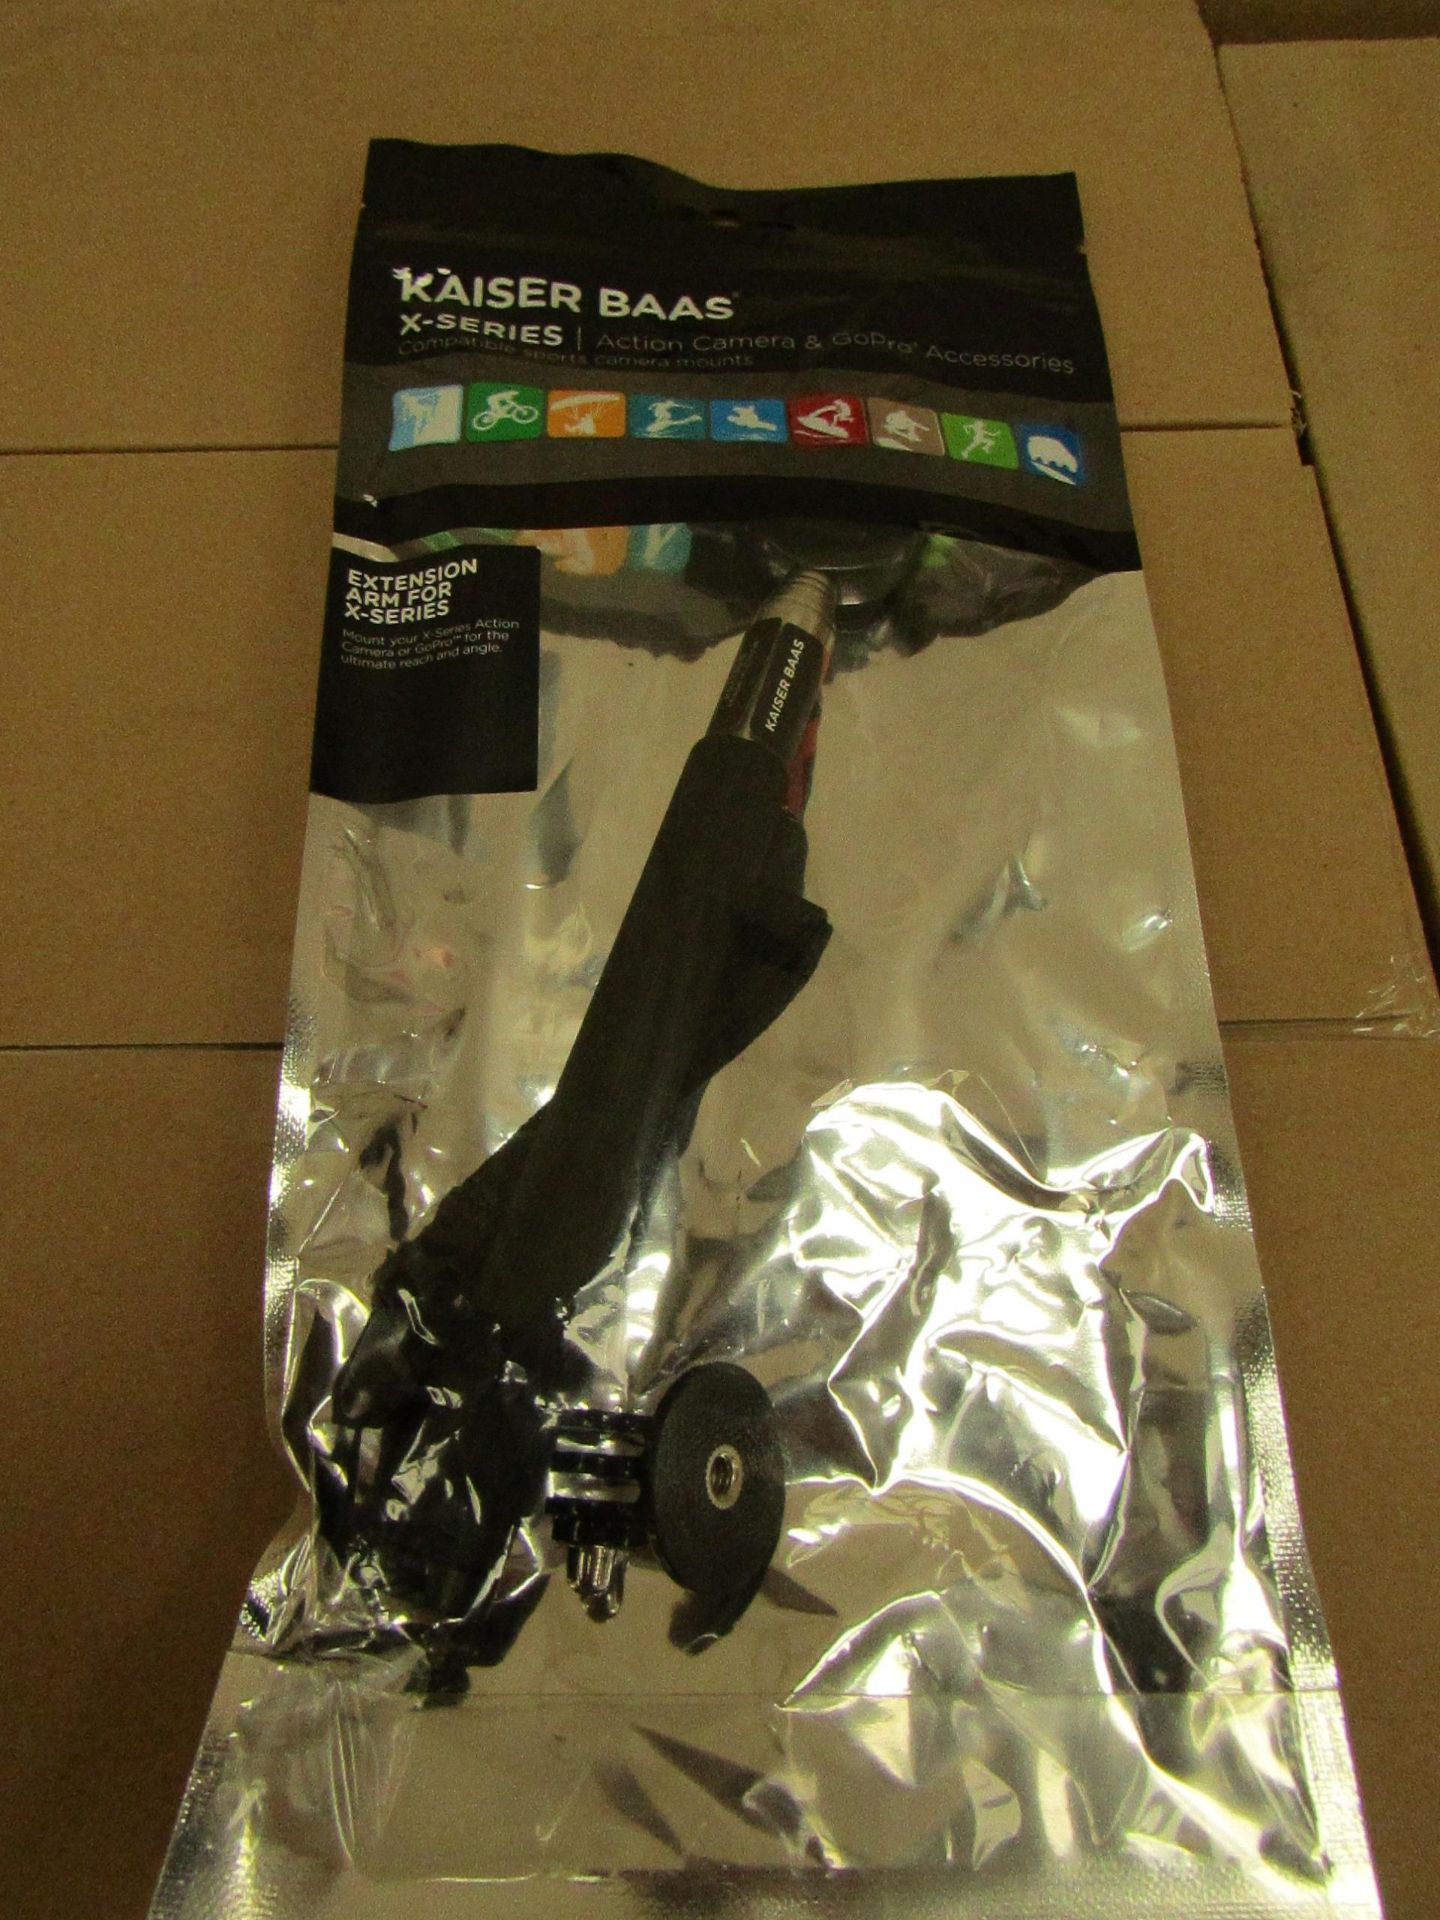 15x Kaiser Baas - X-Series Extension Arm - Suitbable Action Camera & GoPro - Unused & Packaged.